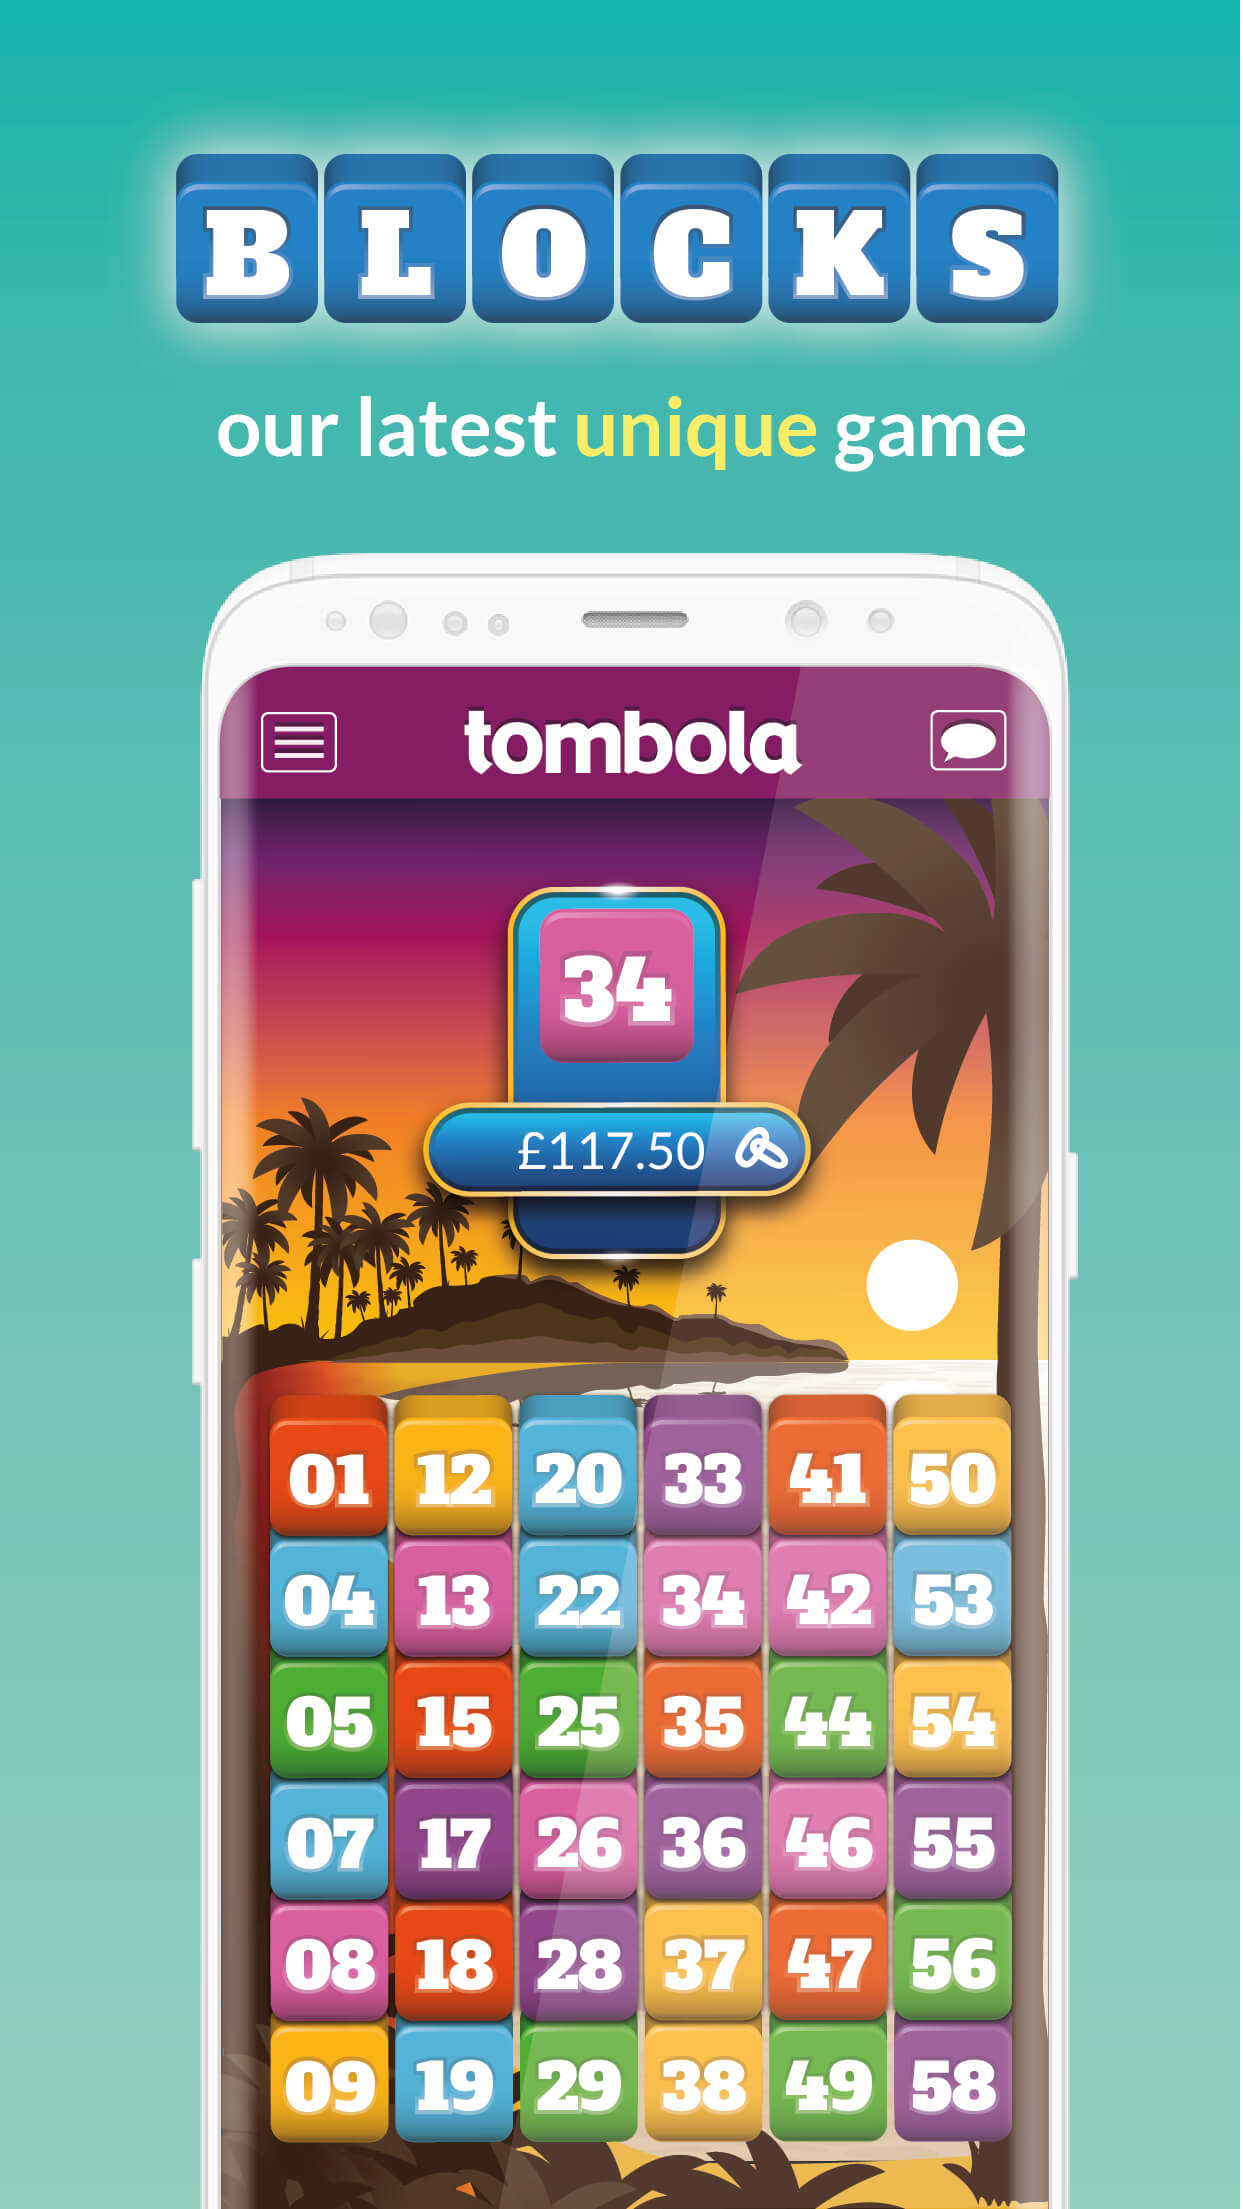 Tombola new account sign in